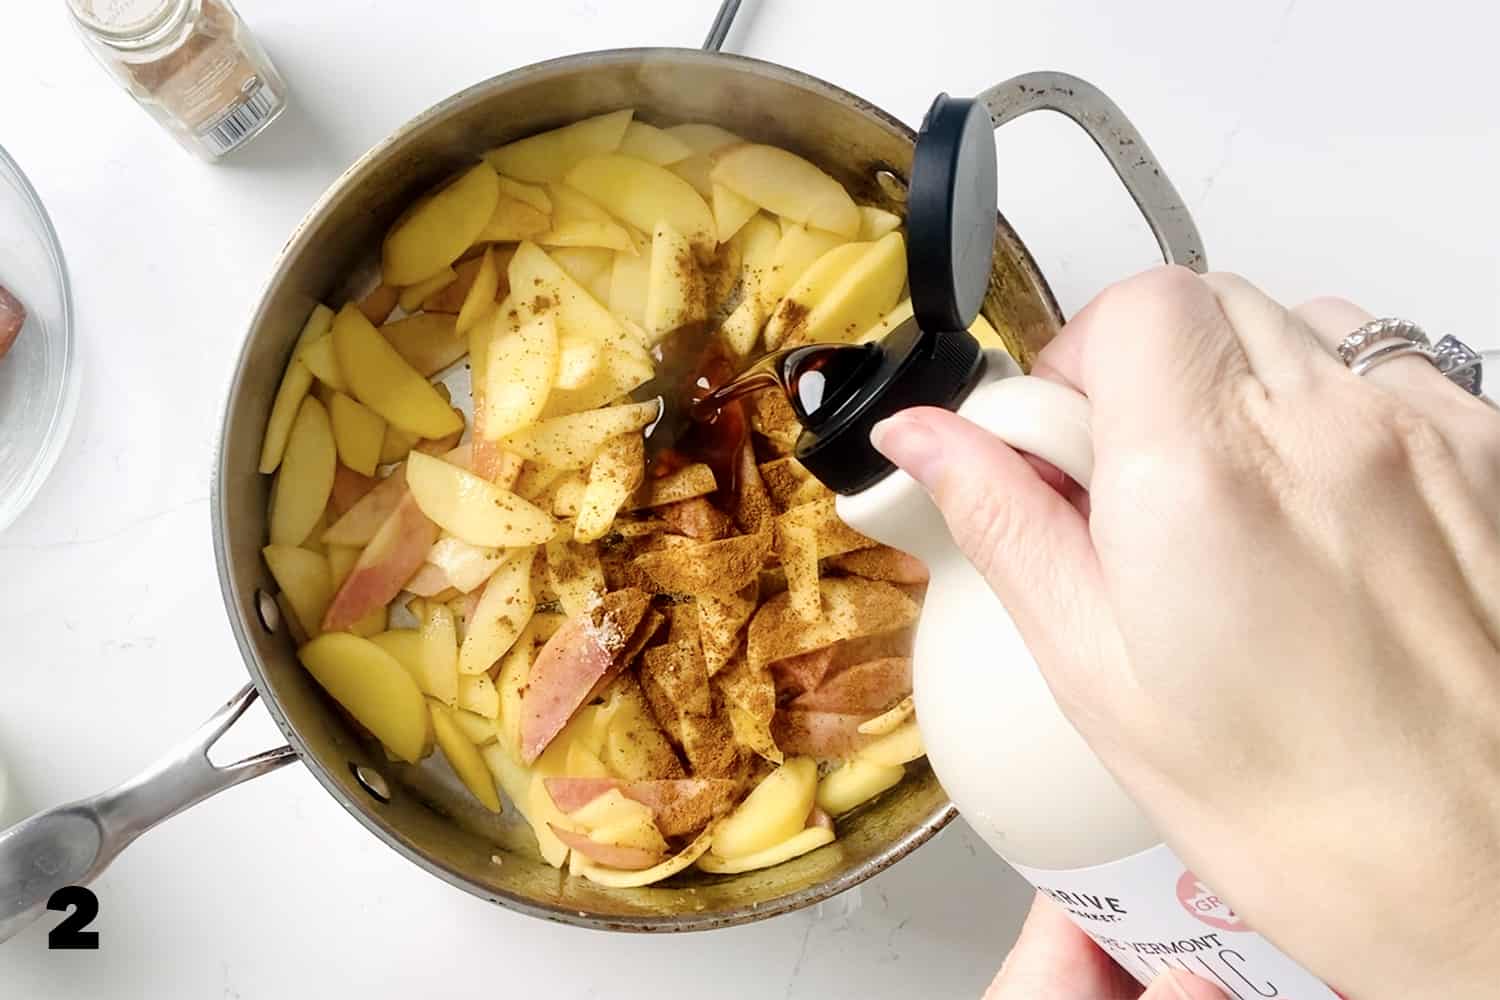 pouring maple syrup in cooking apples with cinnamon